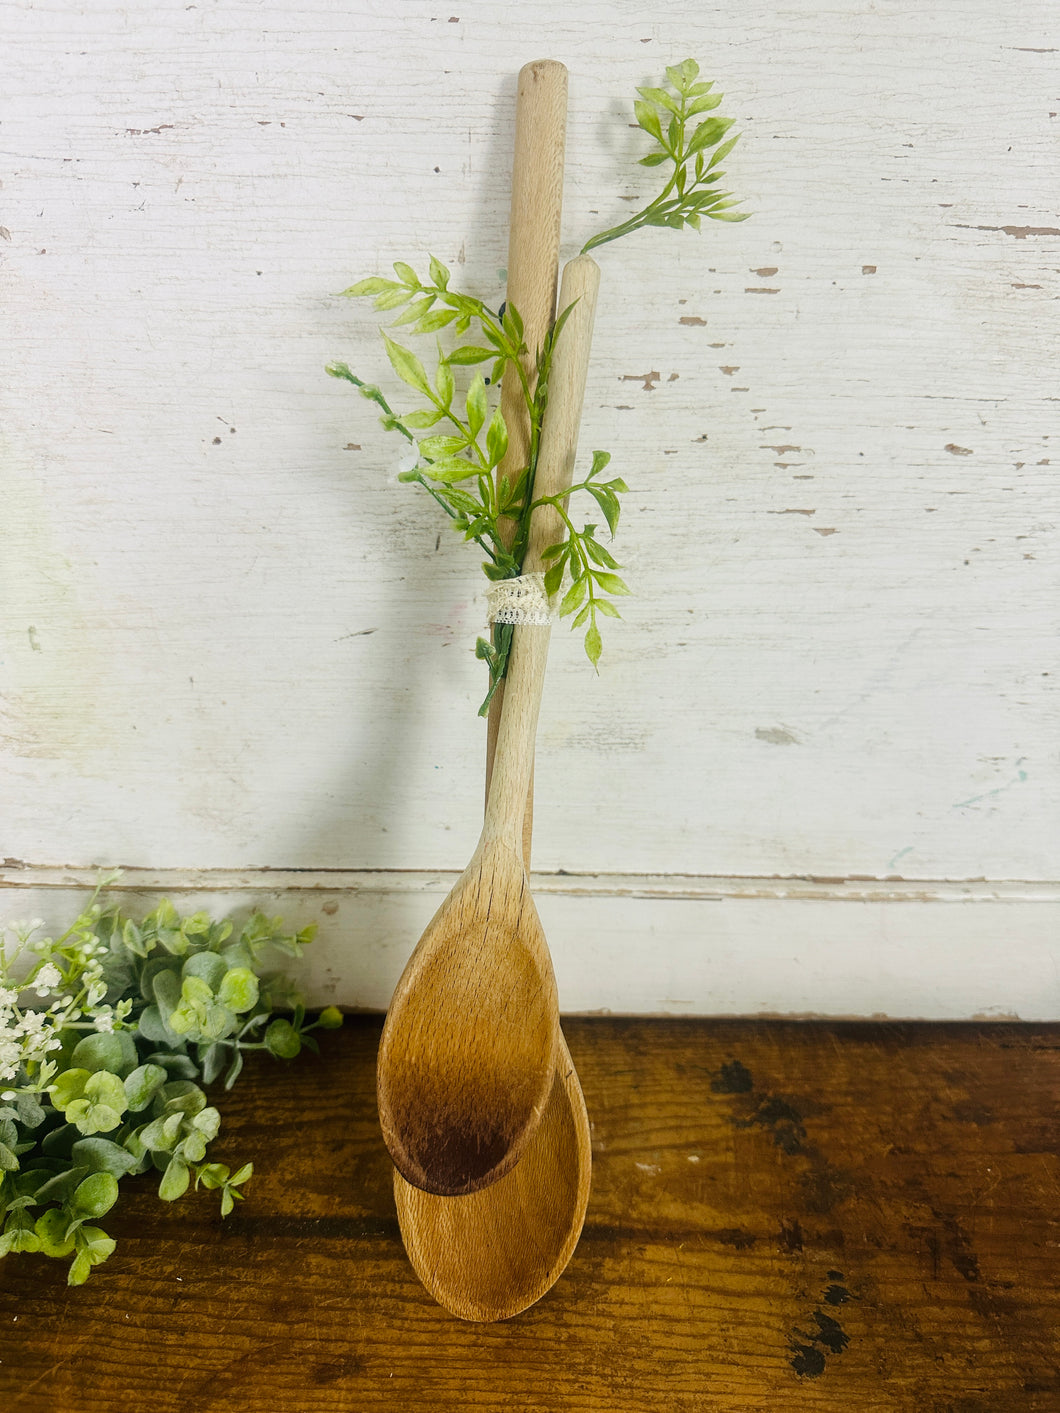 Tied Spoons with Greenery